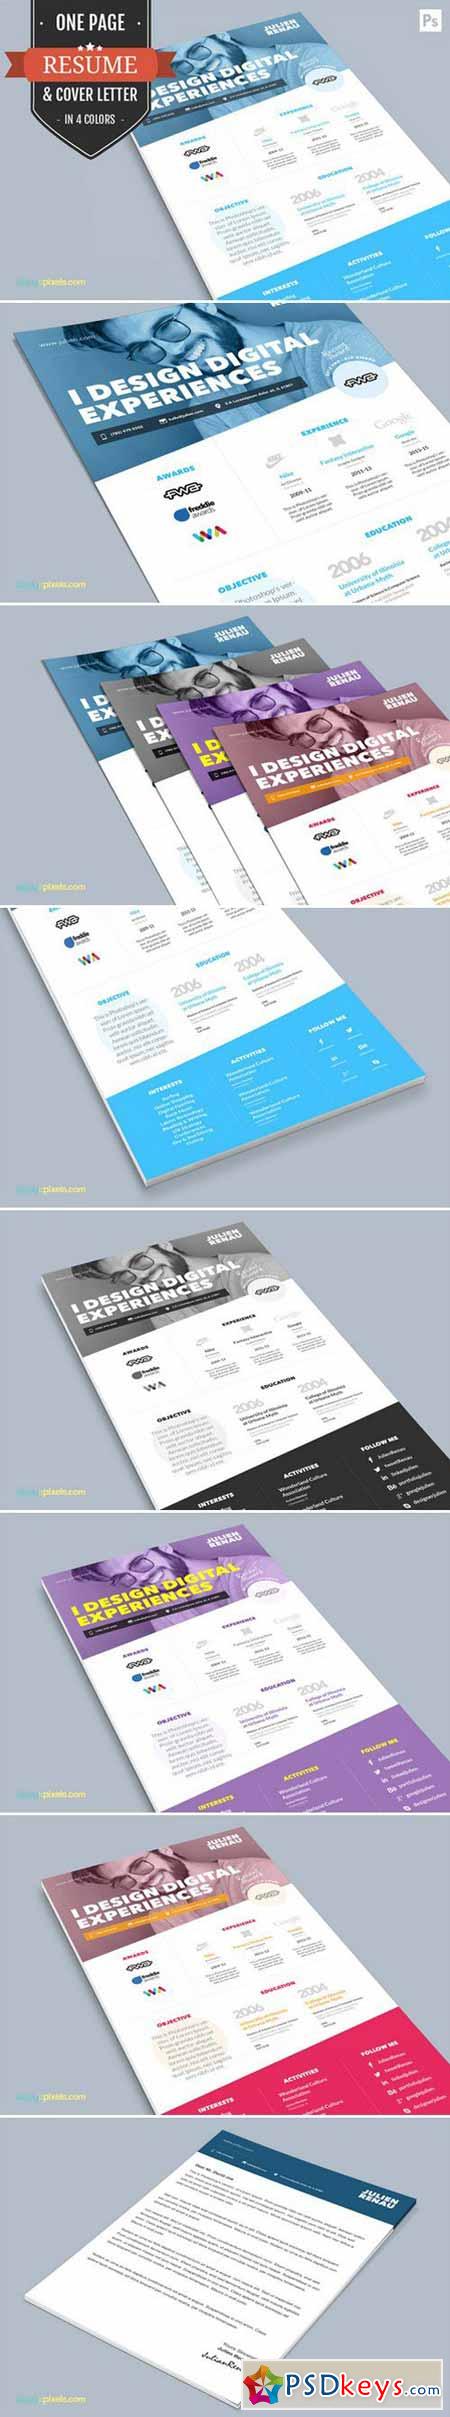 One Page Resume CV & Cover Letter 395440